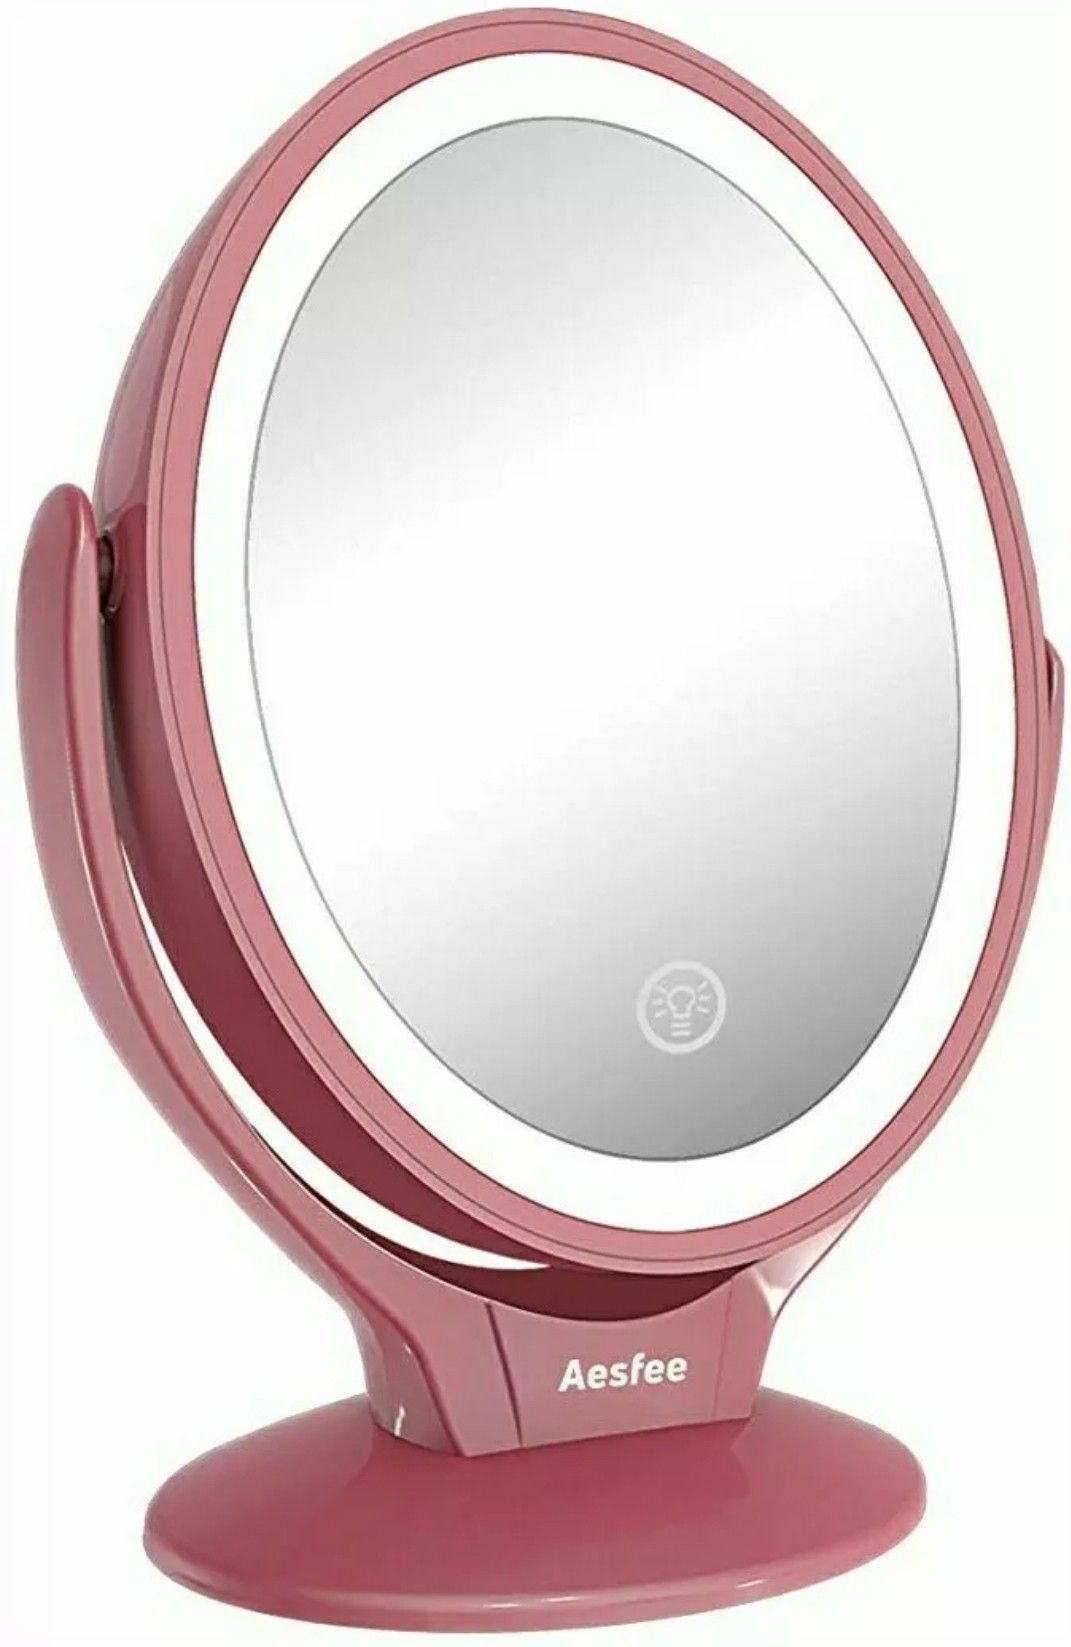 Aesfee LED Lighted Makeup Vanity Mirror Rechargeable 1x / 7x Magnification Do...